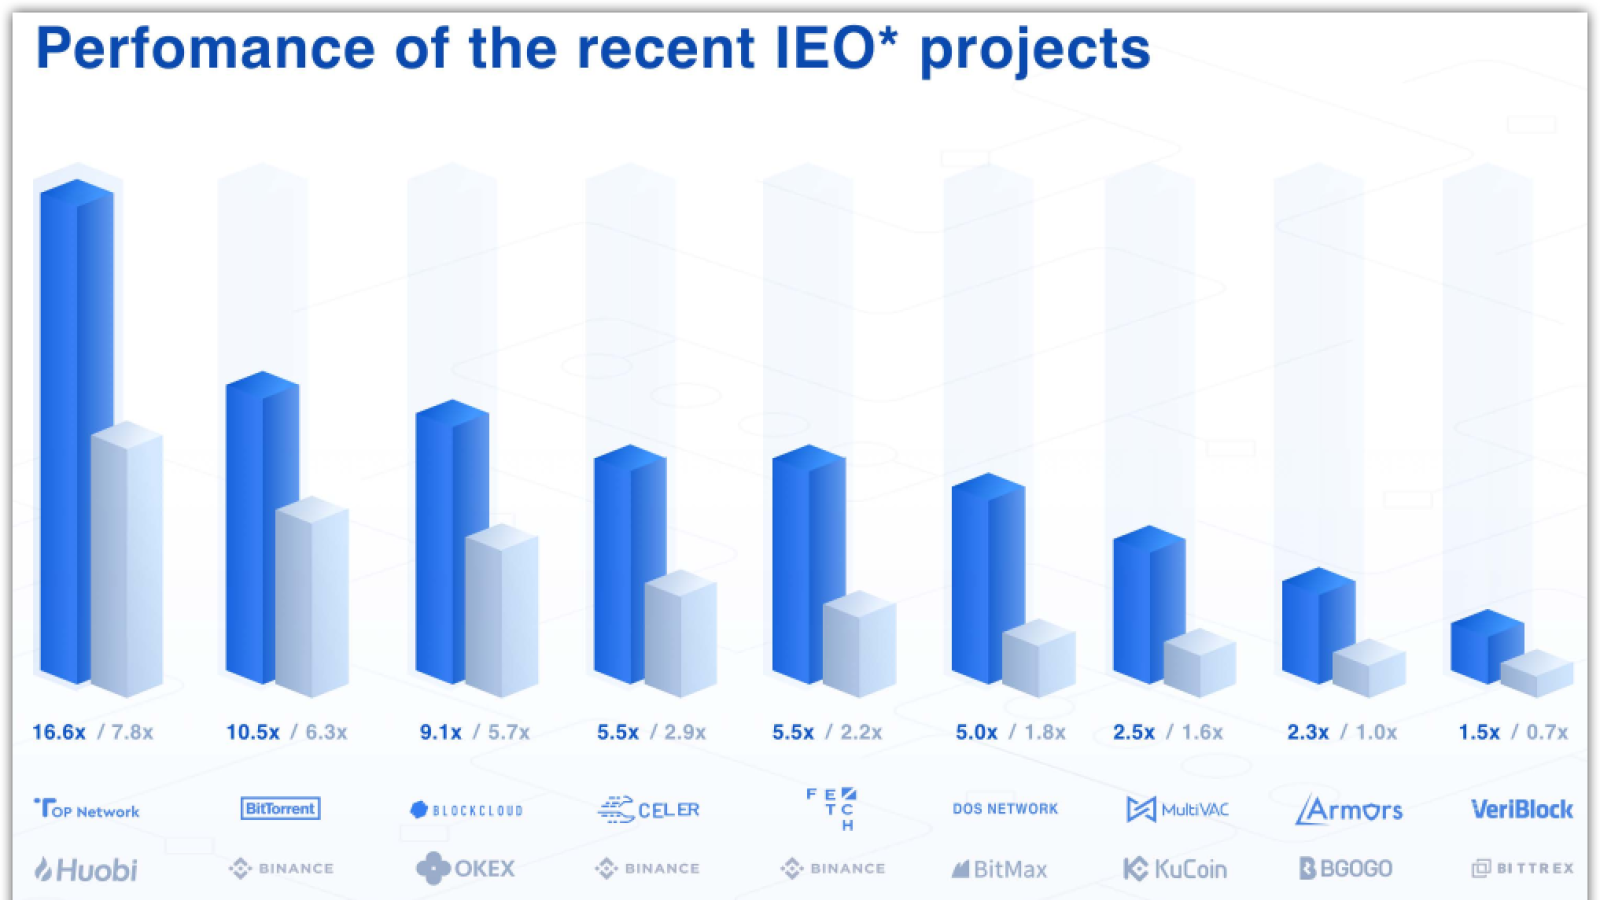 The possible amount of investment in IEO projects is reduced due to rising popularity